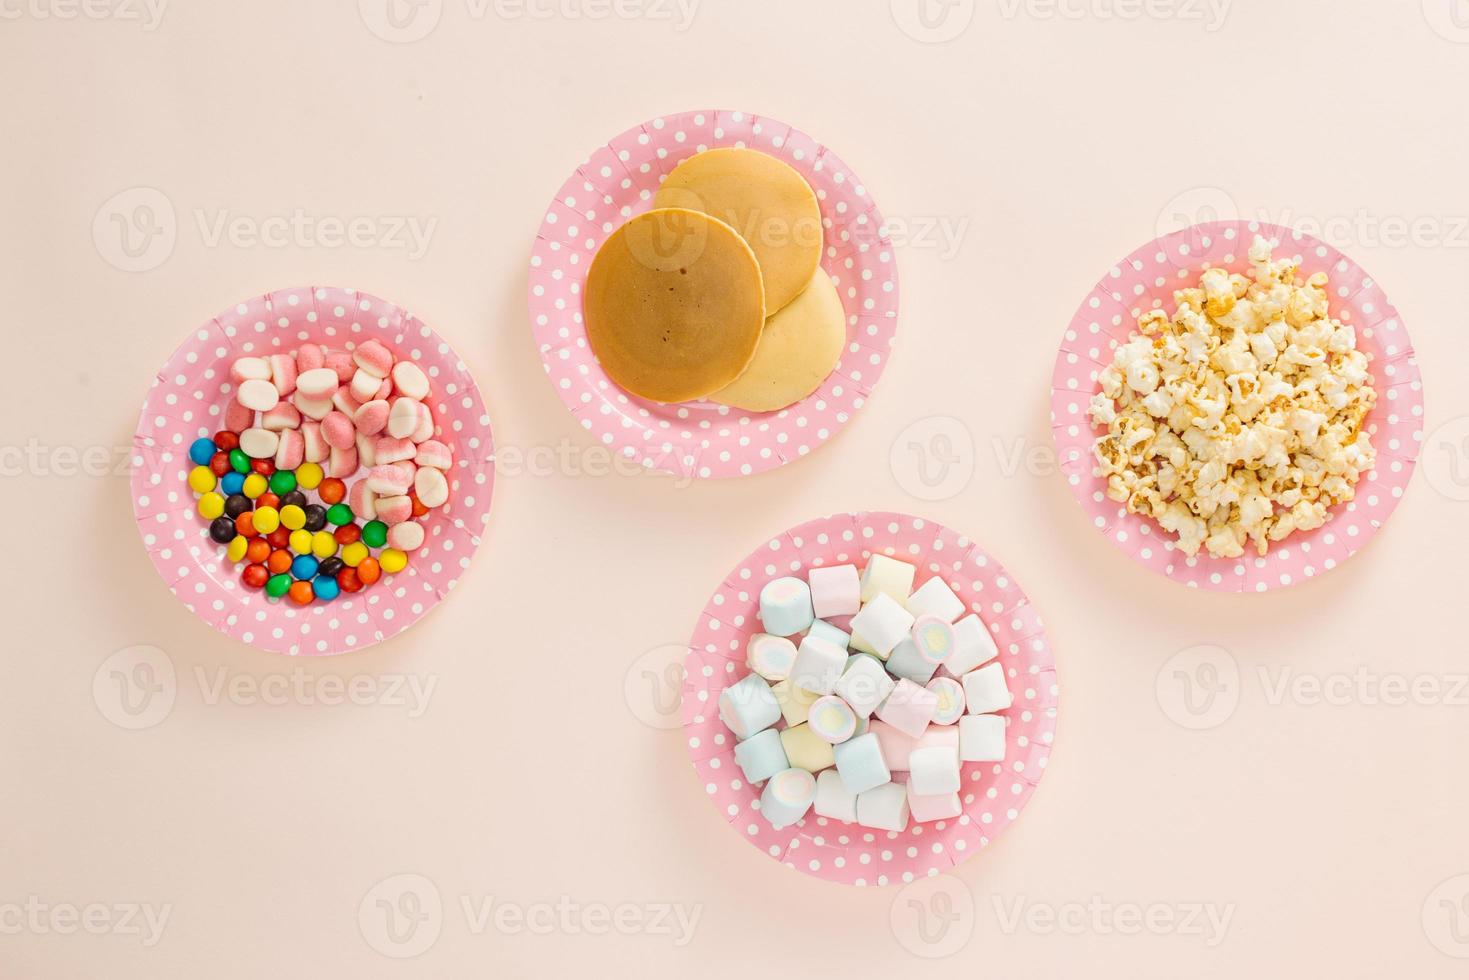 Pancakes with candies for the children. Top view photo